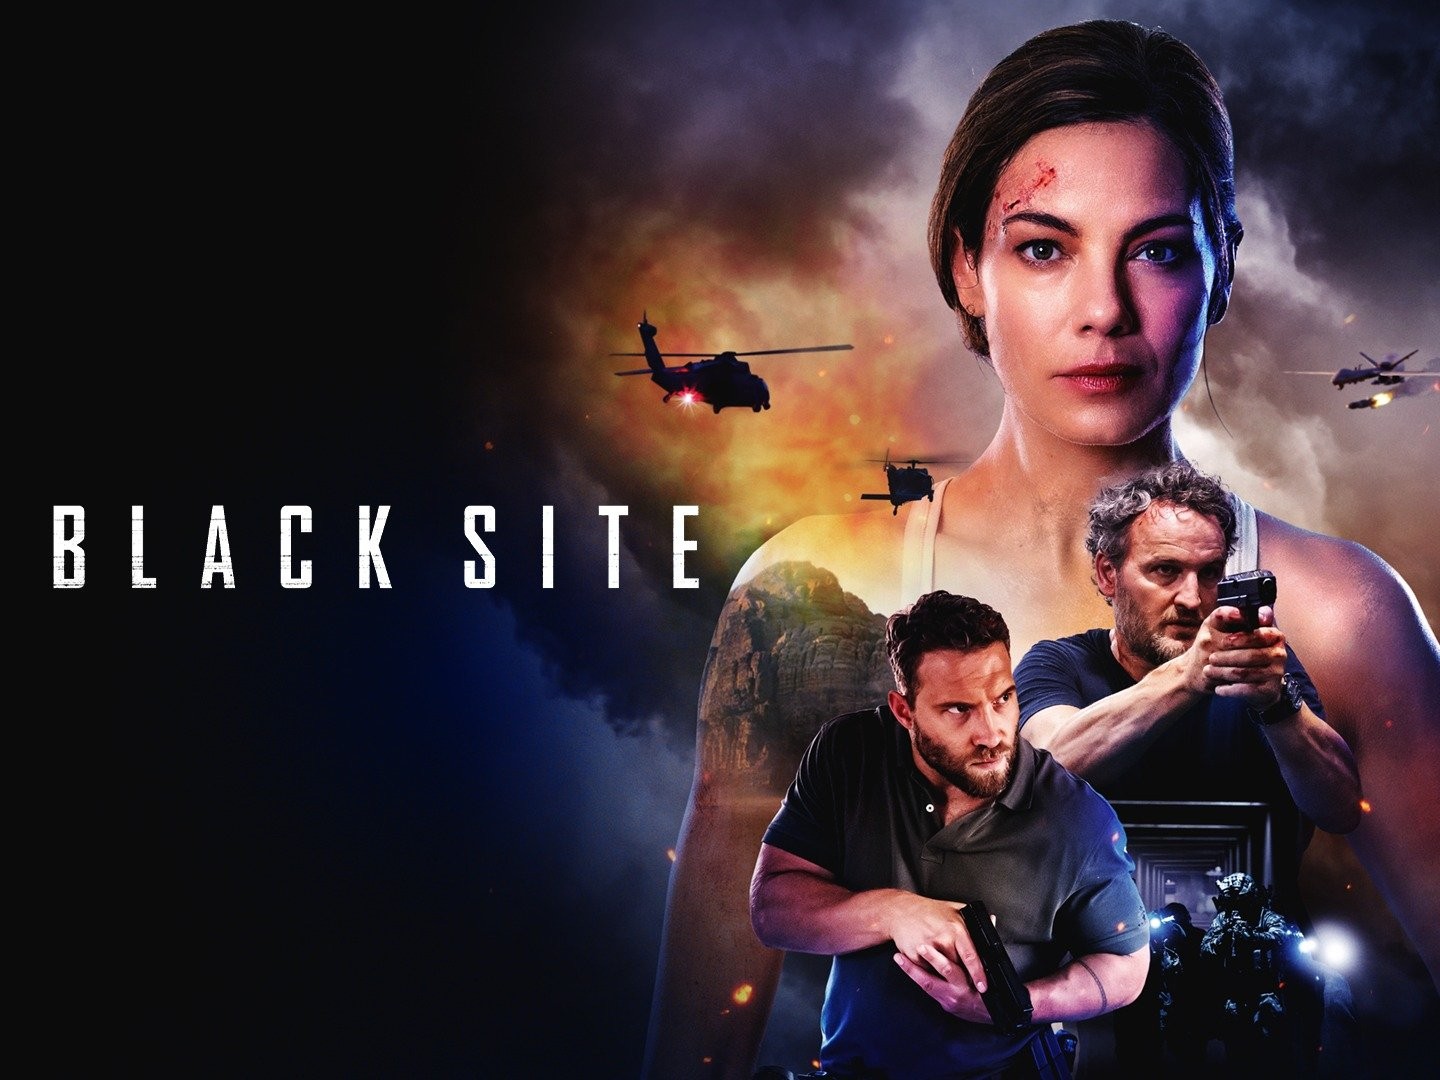 Black Site streaming: where to watch movie online?